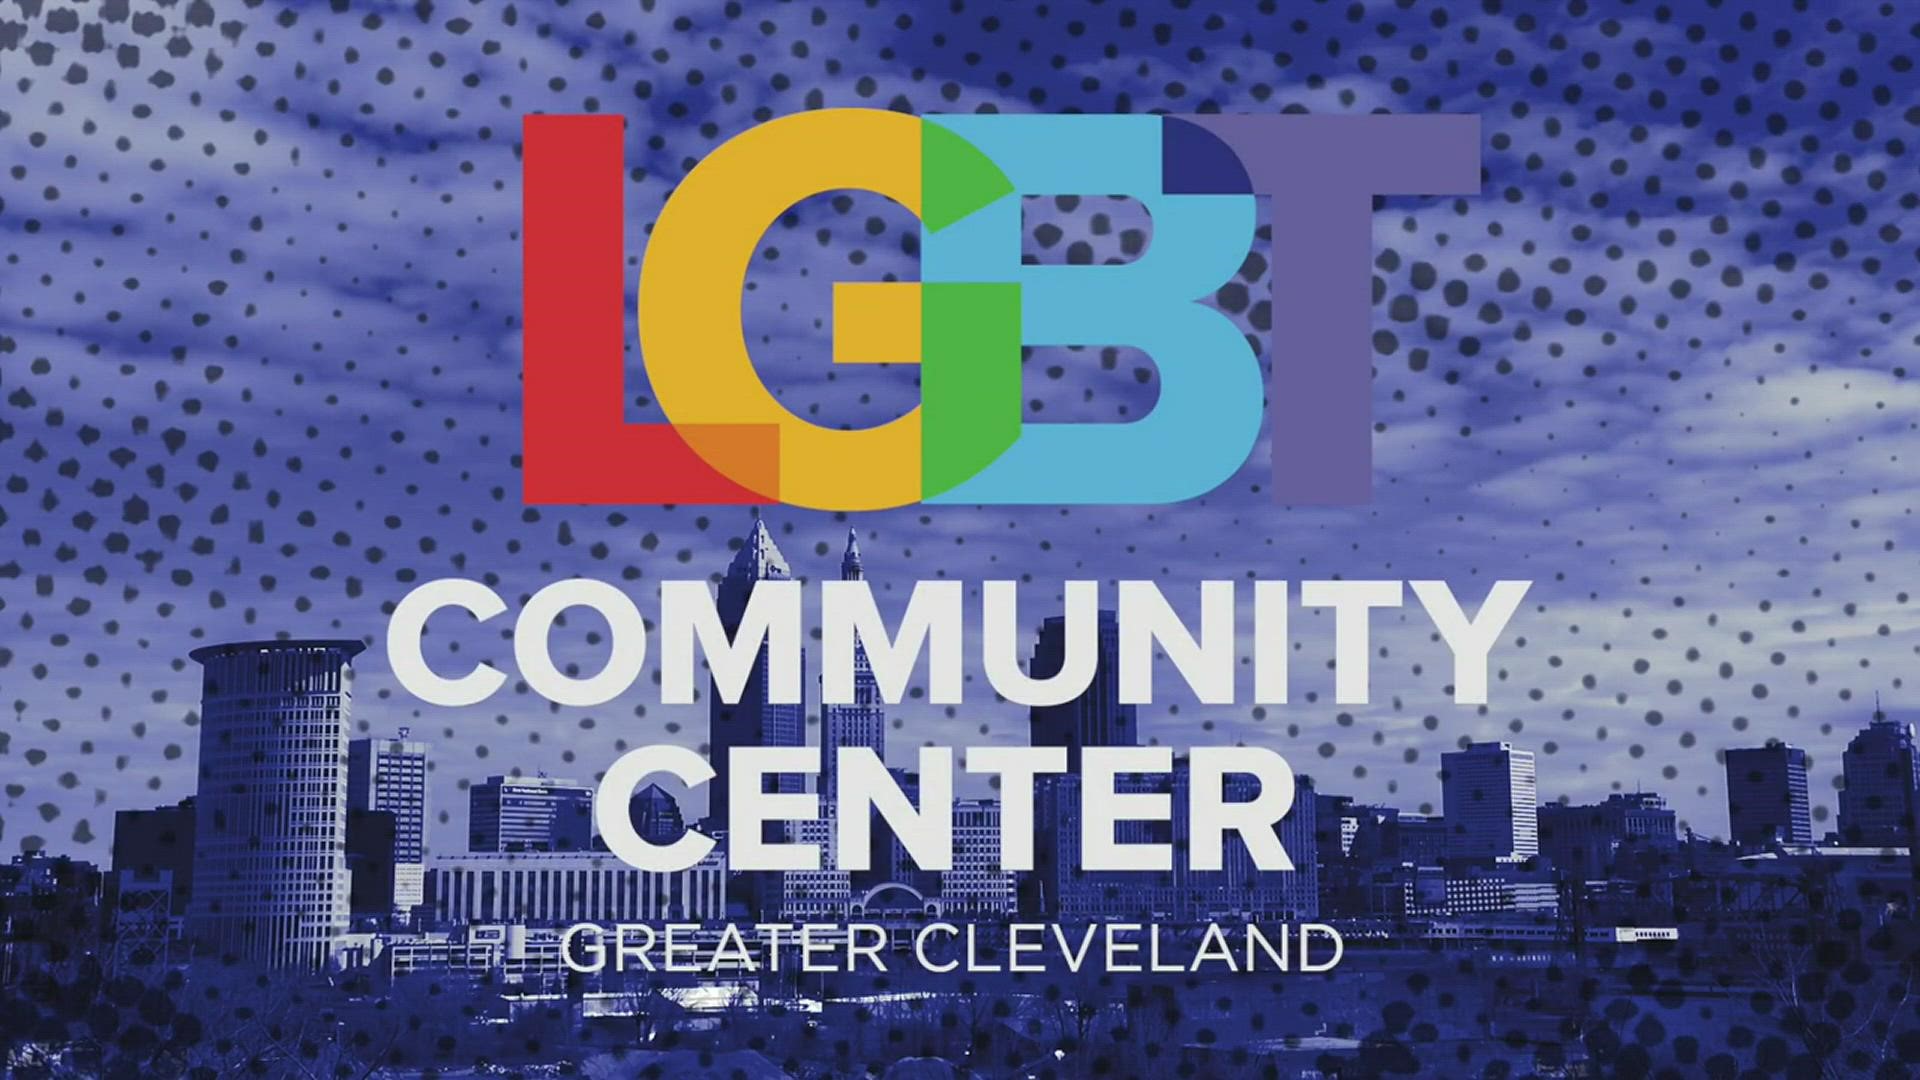 Viewers can enjoy the sights and sounds of the LGBT community with special guests